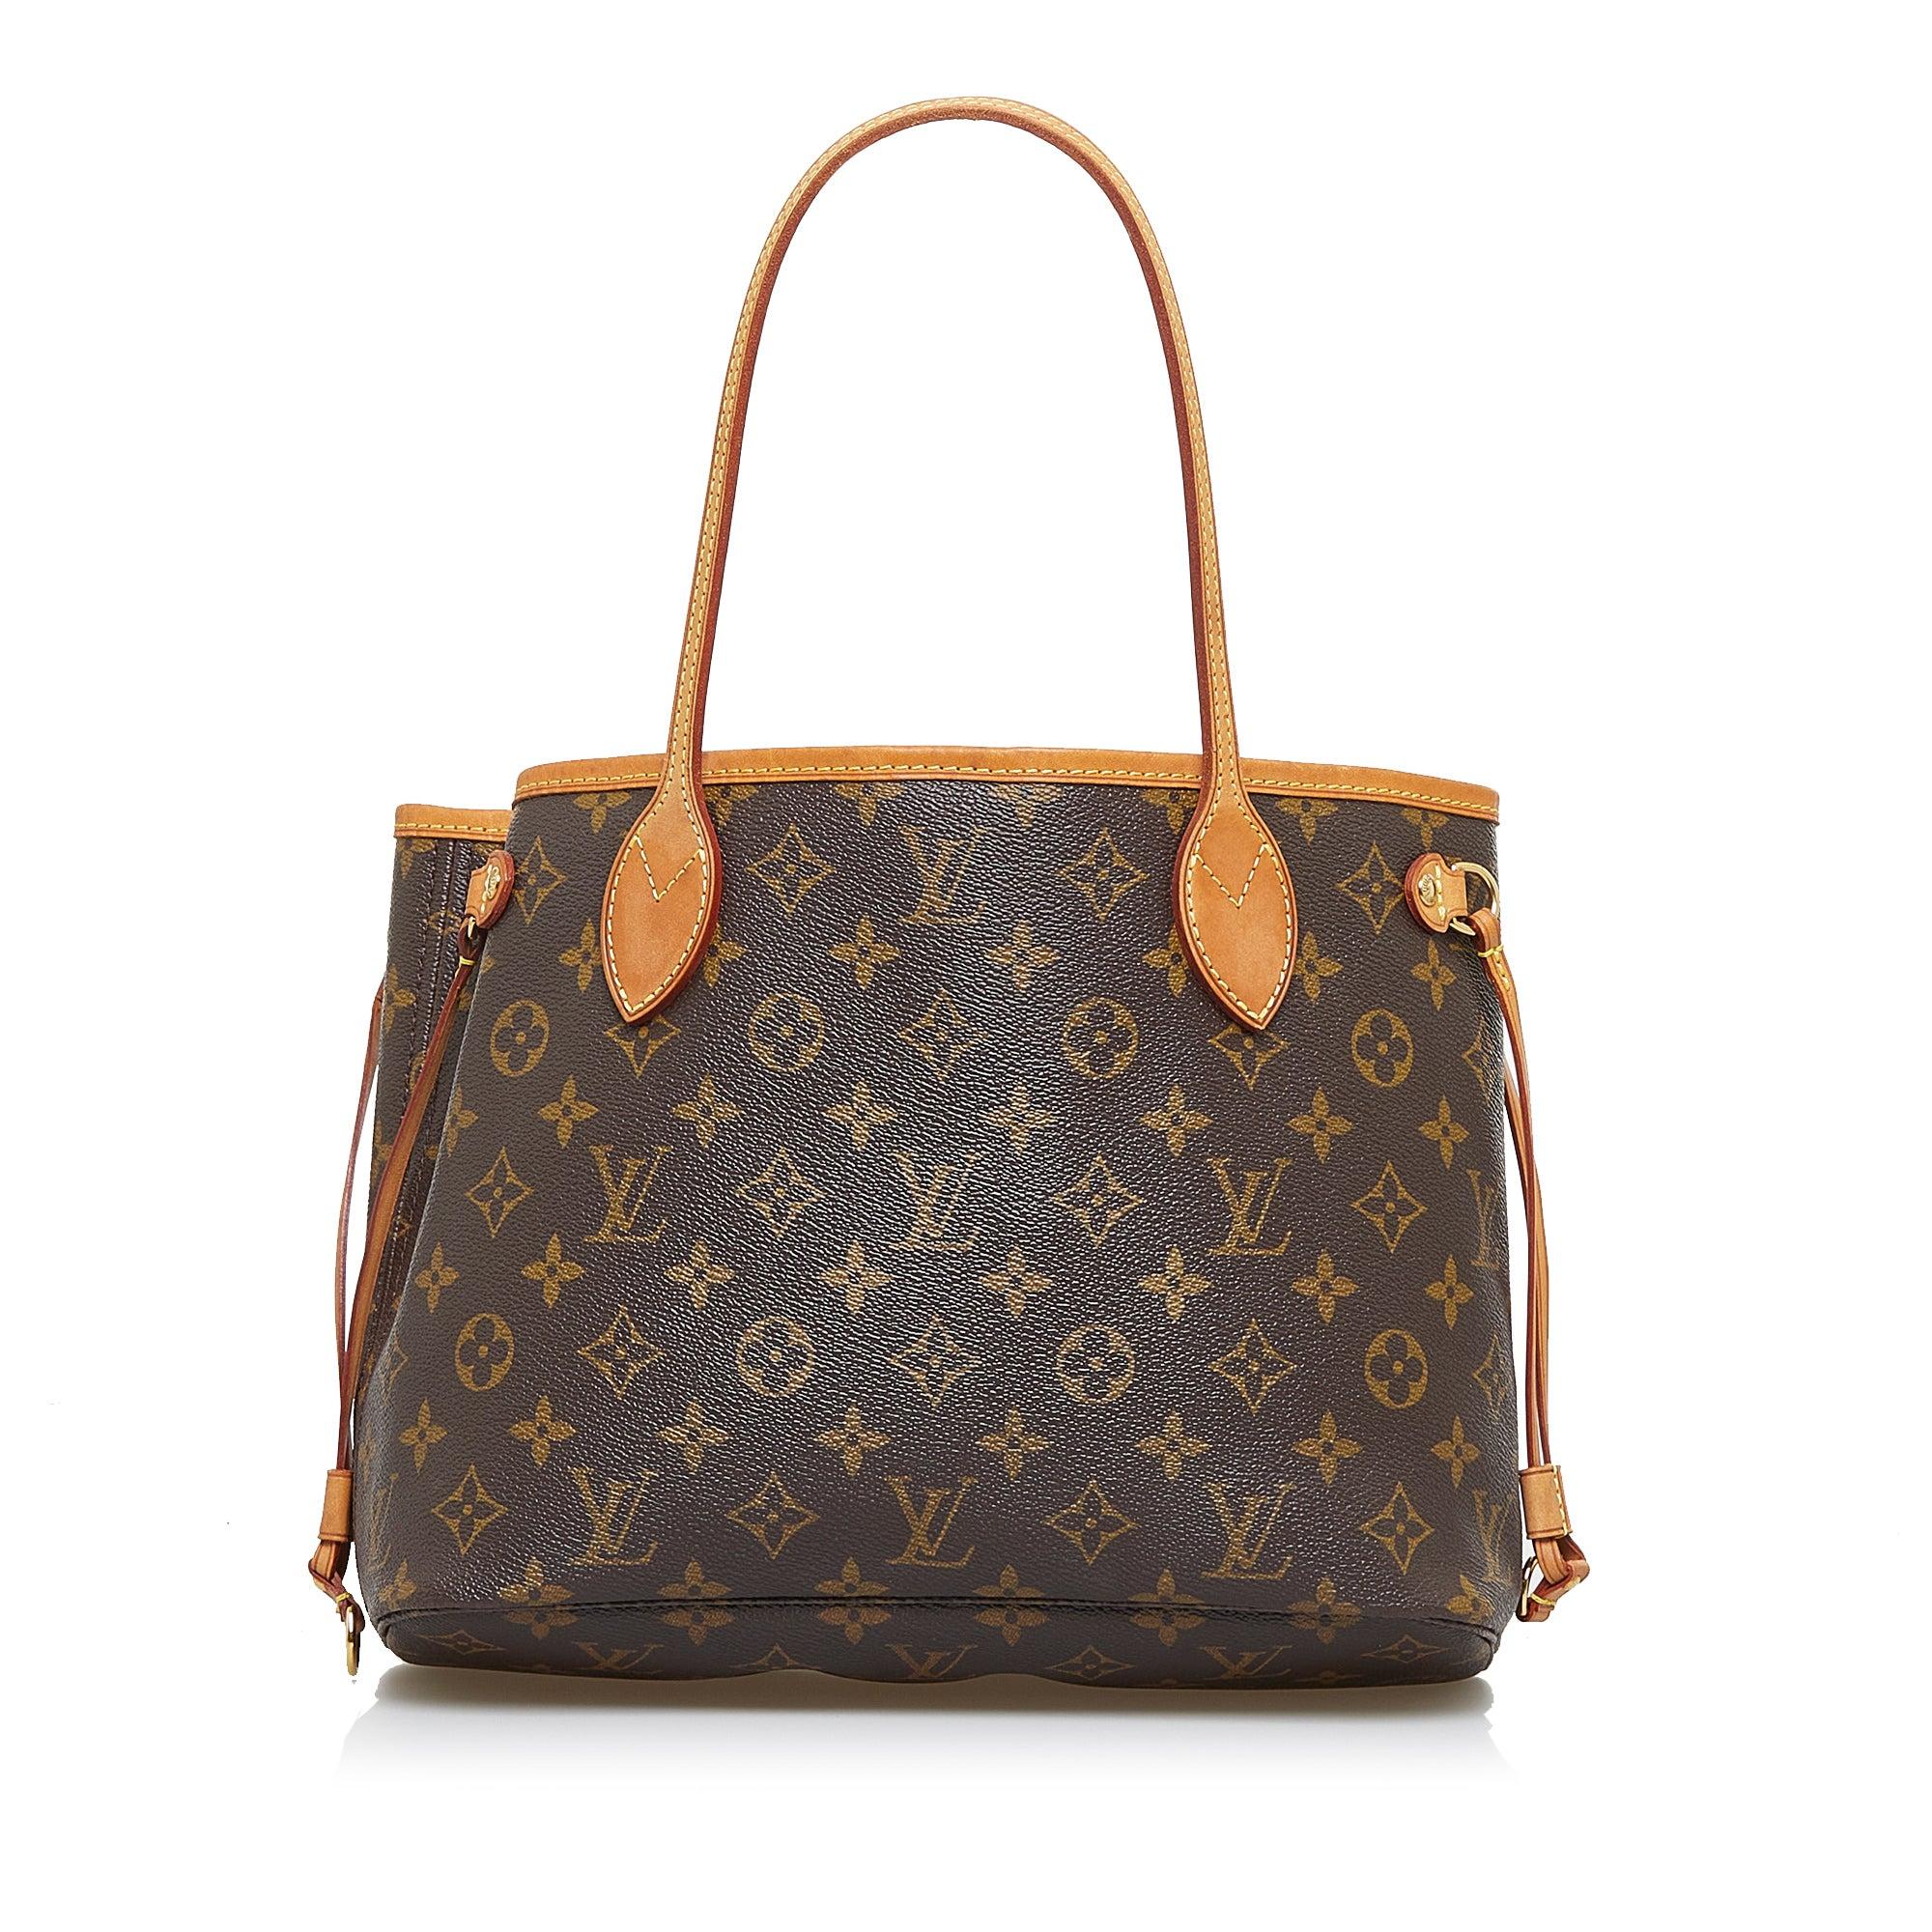 Louis Vuitton Monogram Neverfull Pm Canvas Tote Bag (pre-owned) in